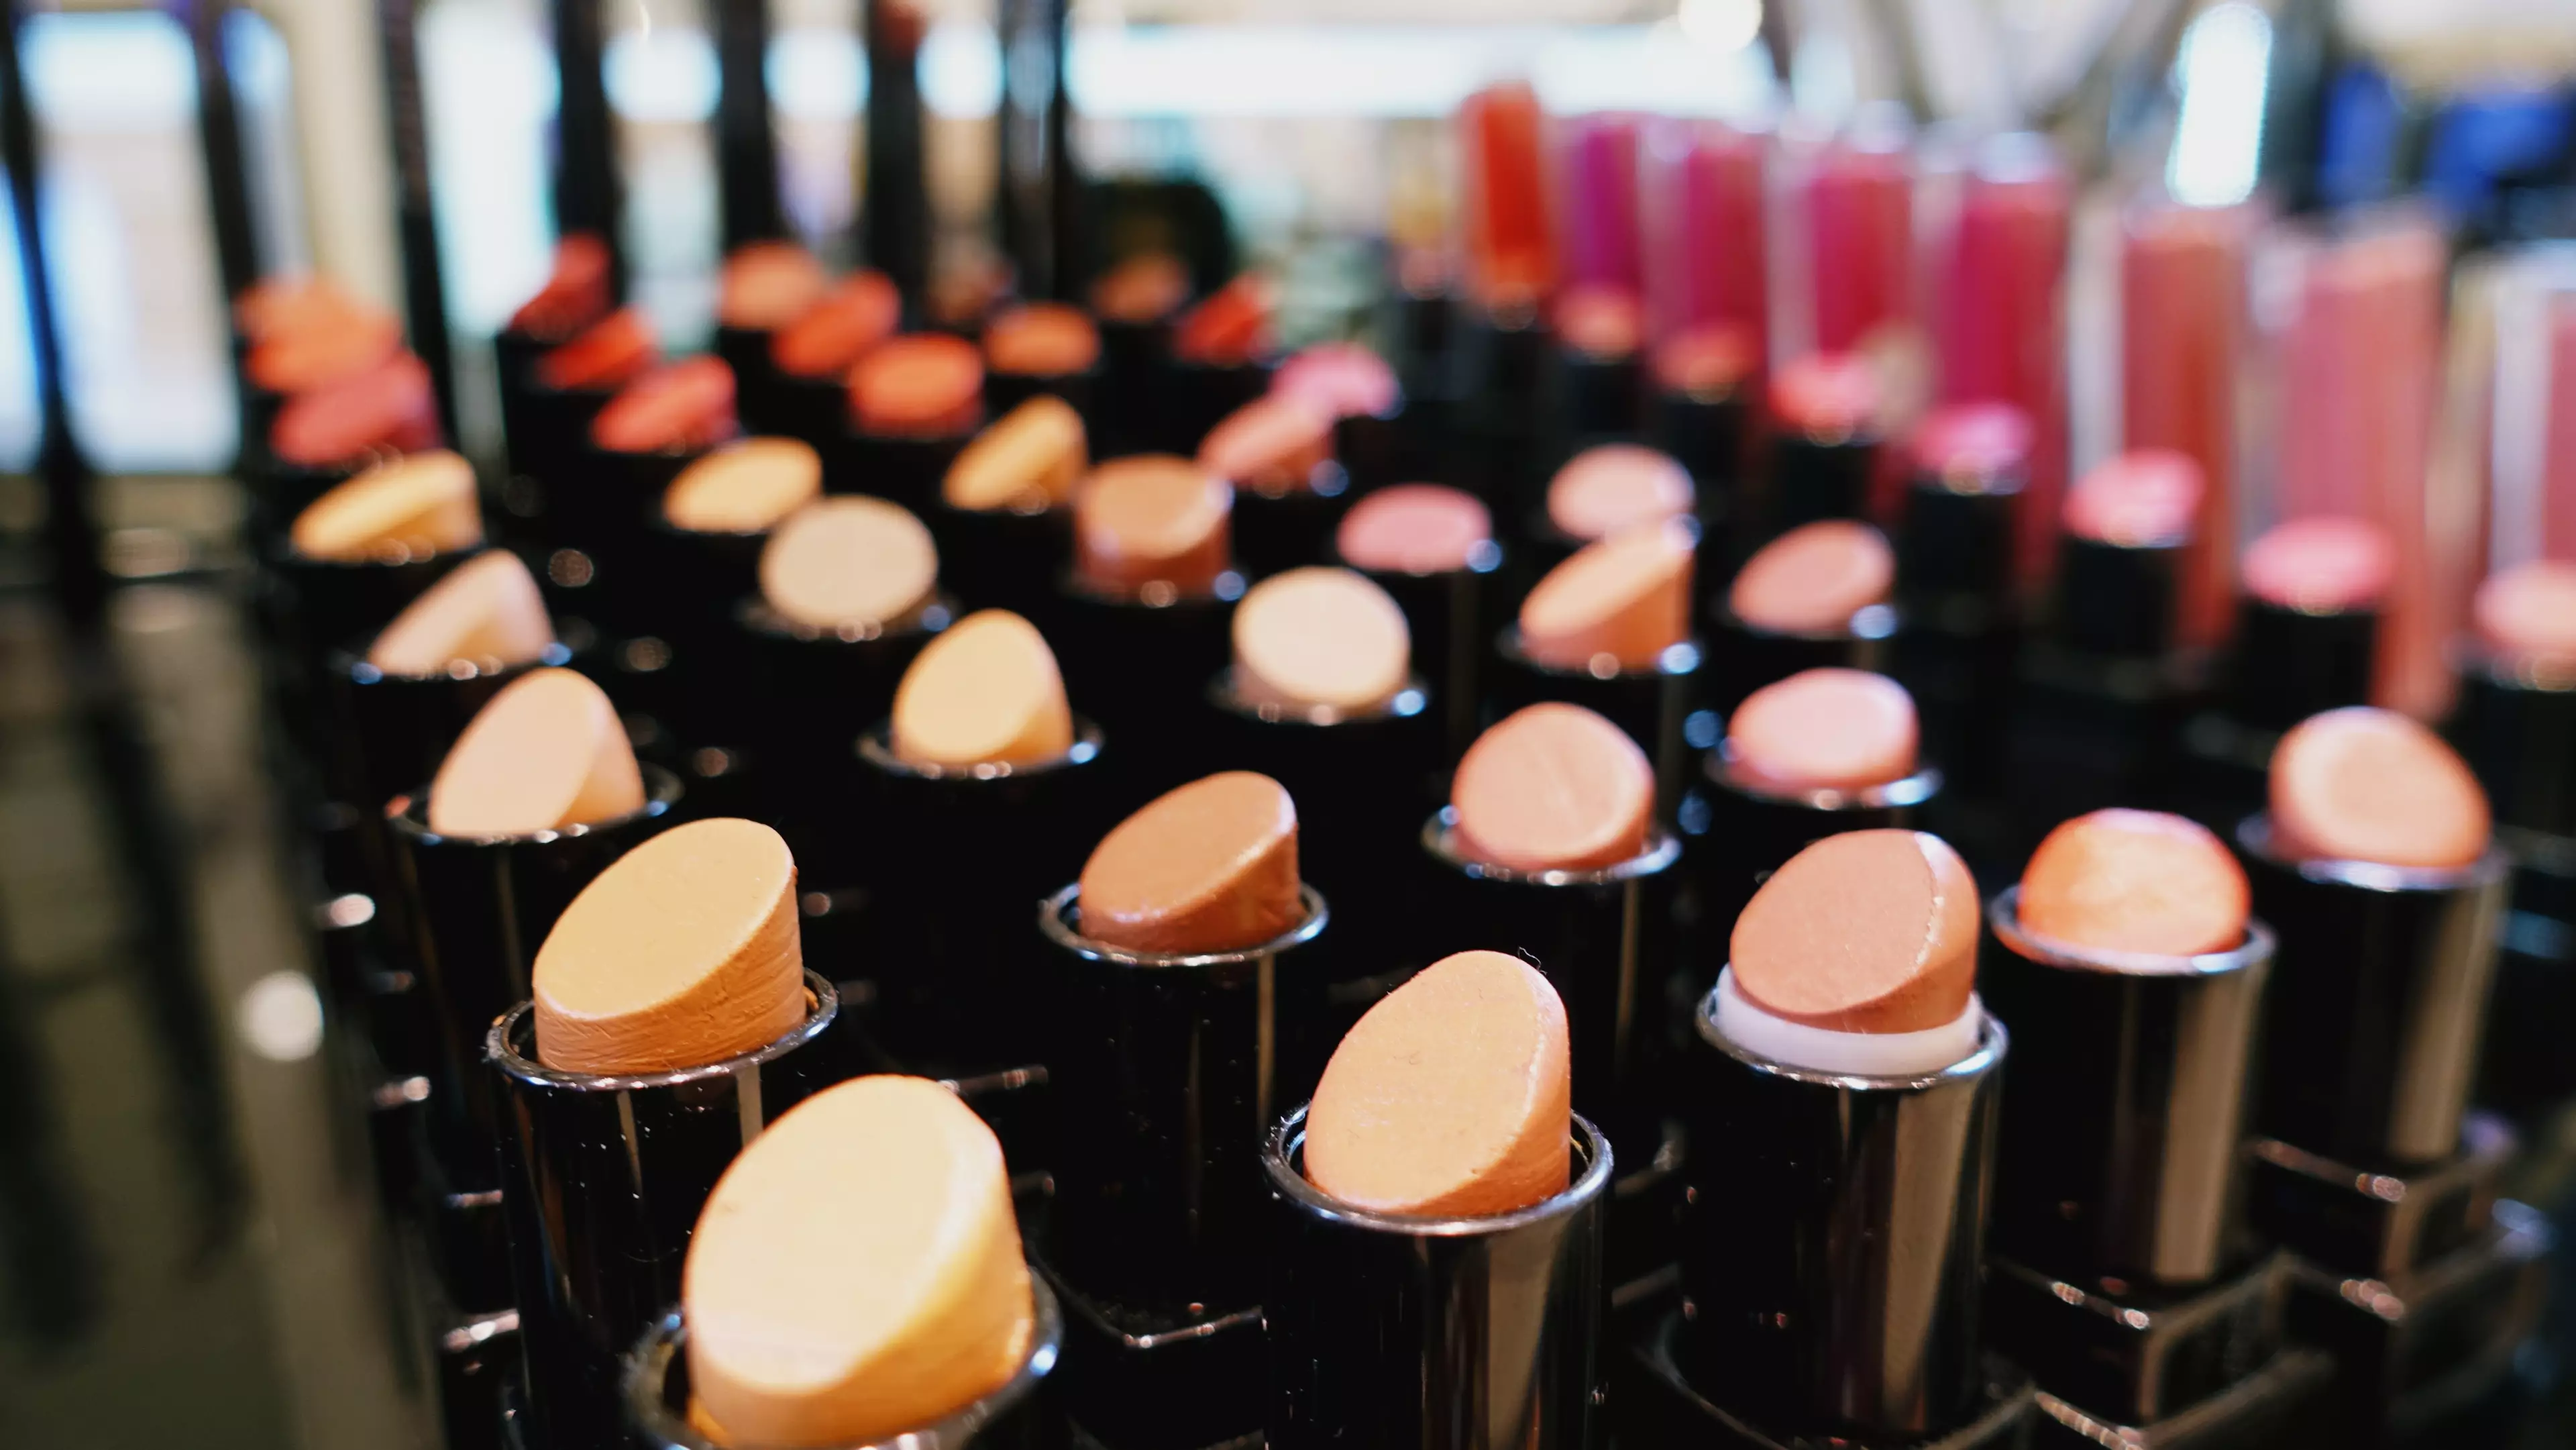 Many women still struggle to find the colour that matches their skin tone at the beauty counter (